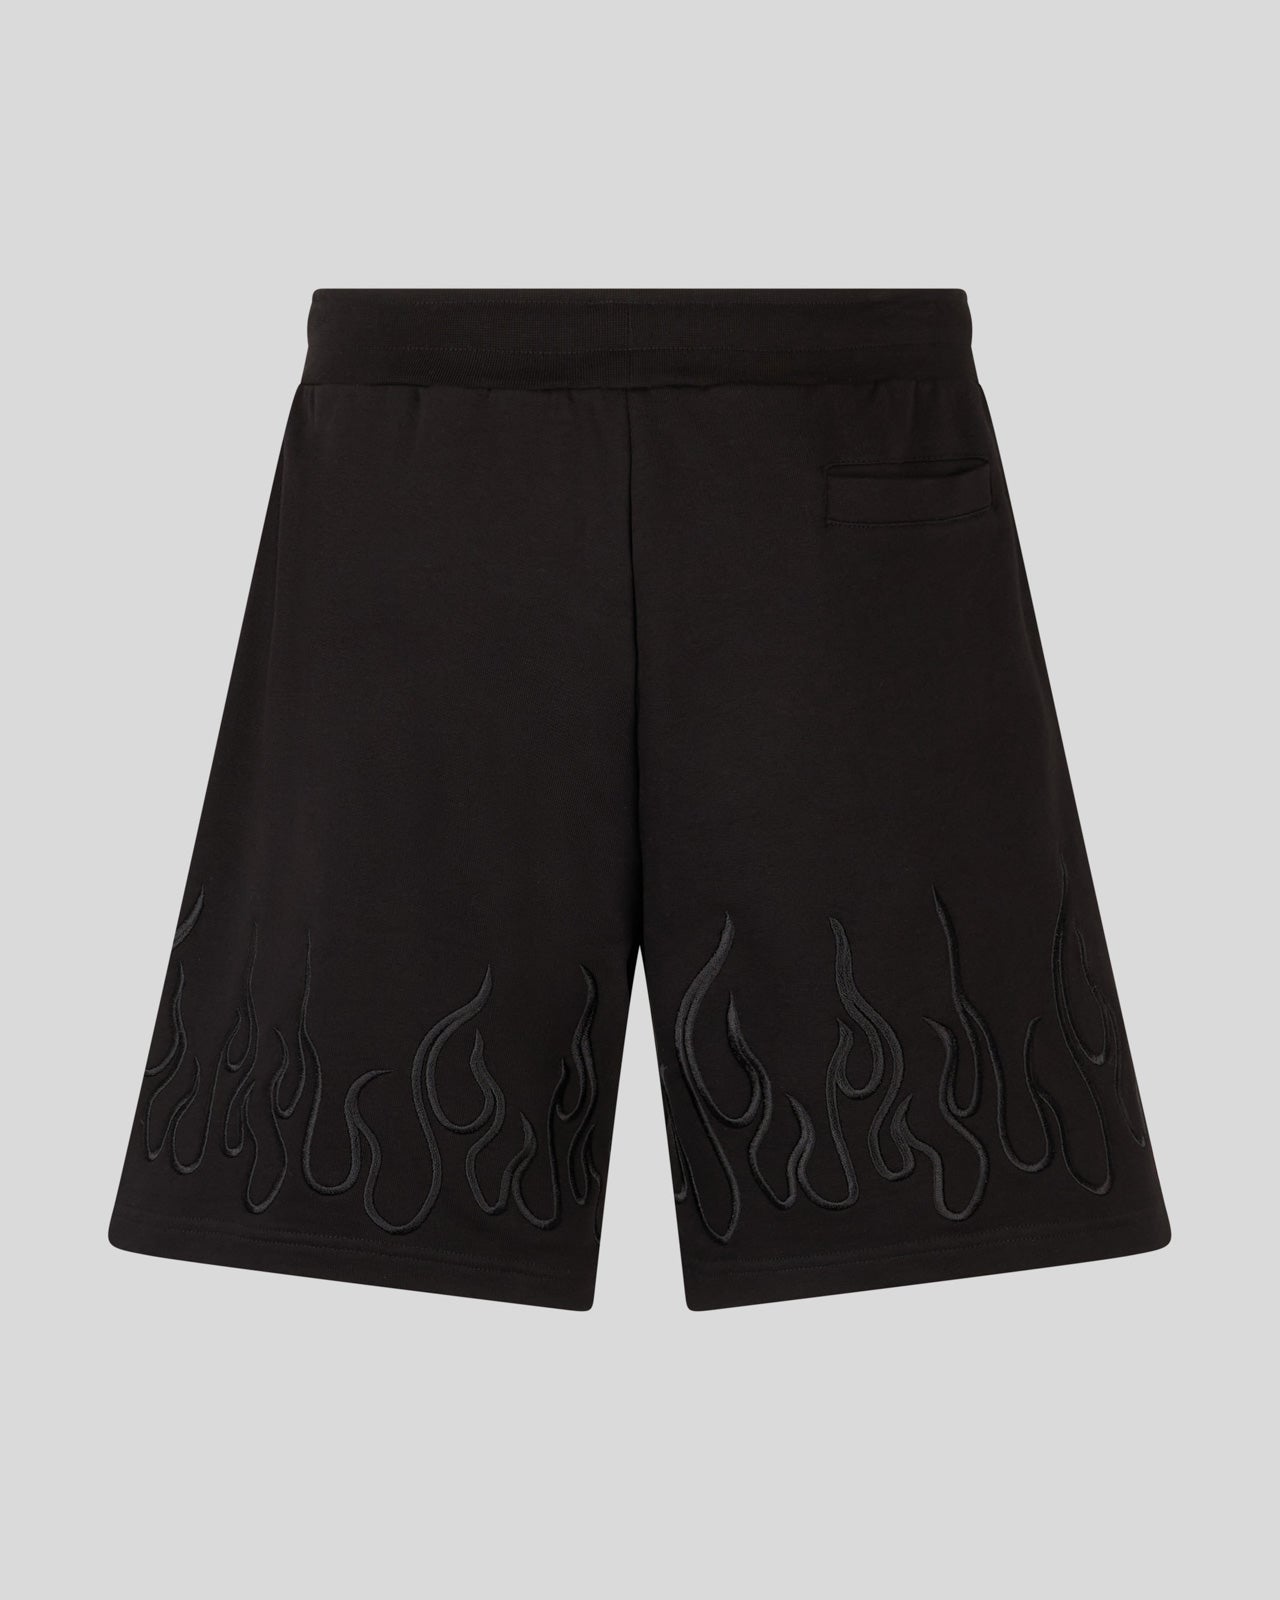 BLACK SHORTS WITH EMBROIDERED BLACK FLAMES